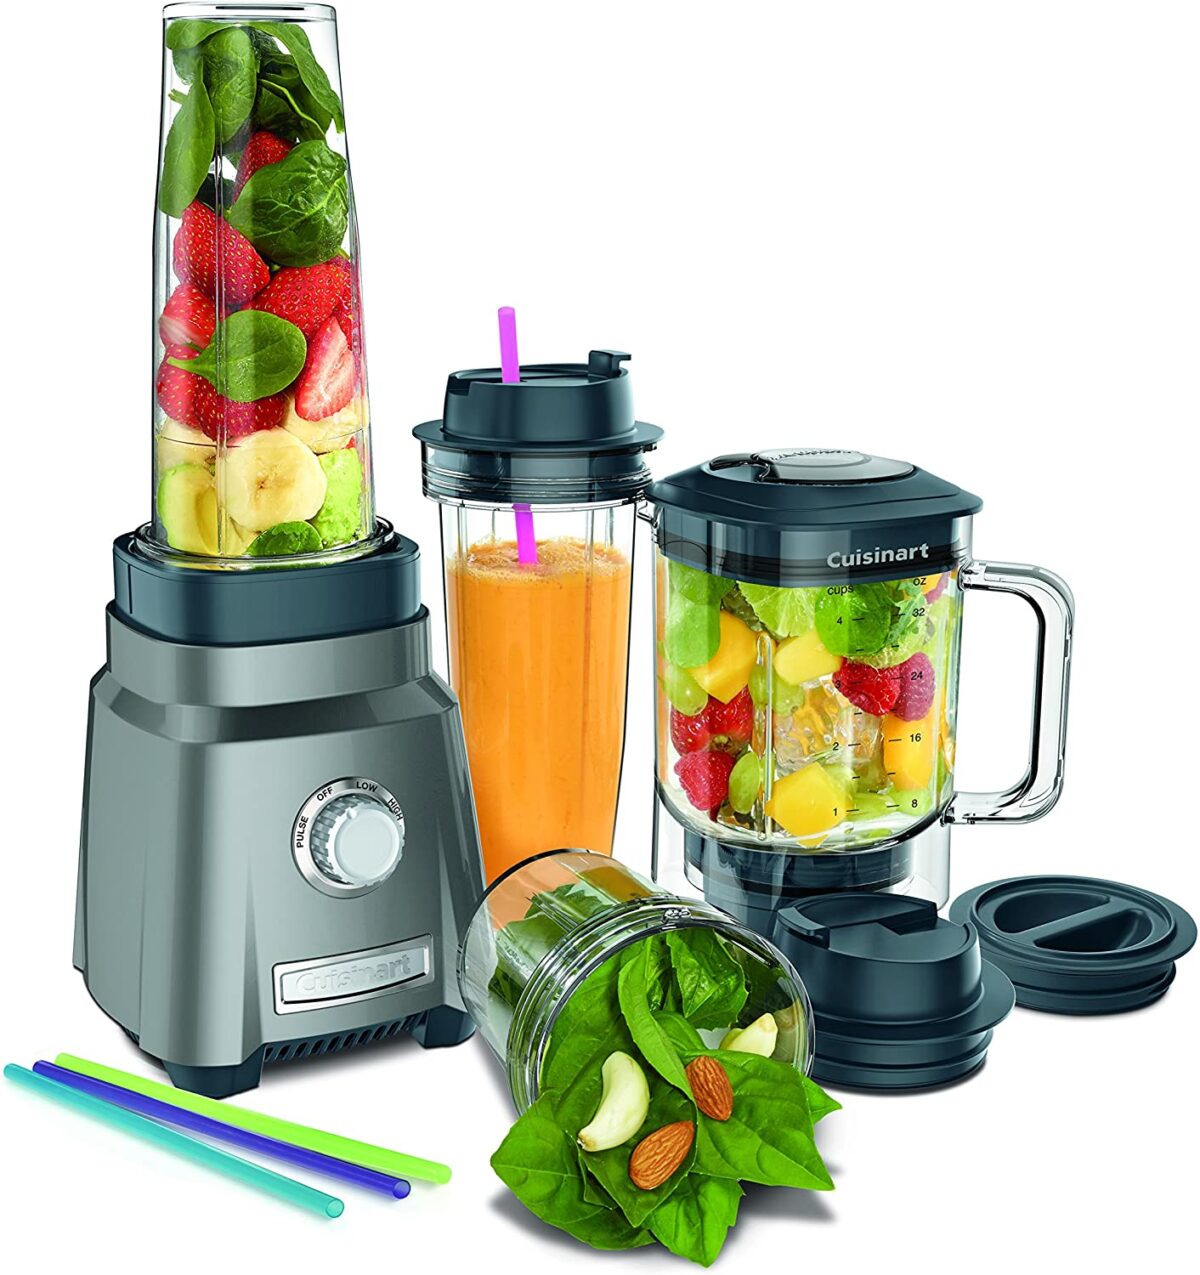 How to choose the best blenders of